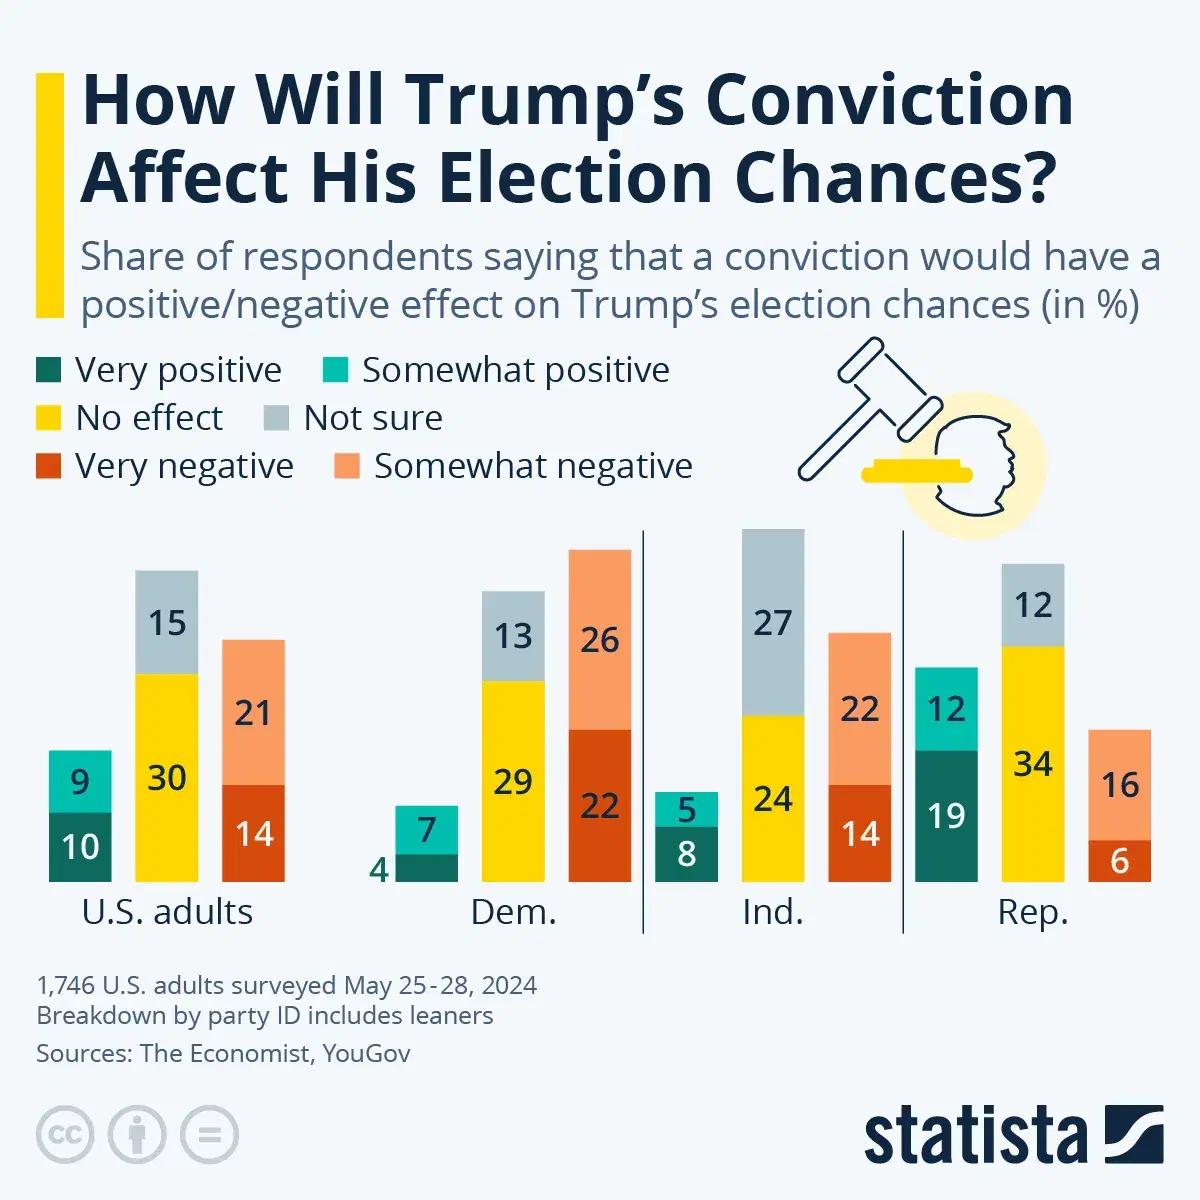 How Will Trump's Conviction Affect His Election Chances?